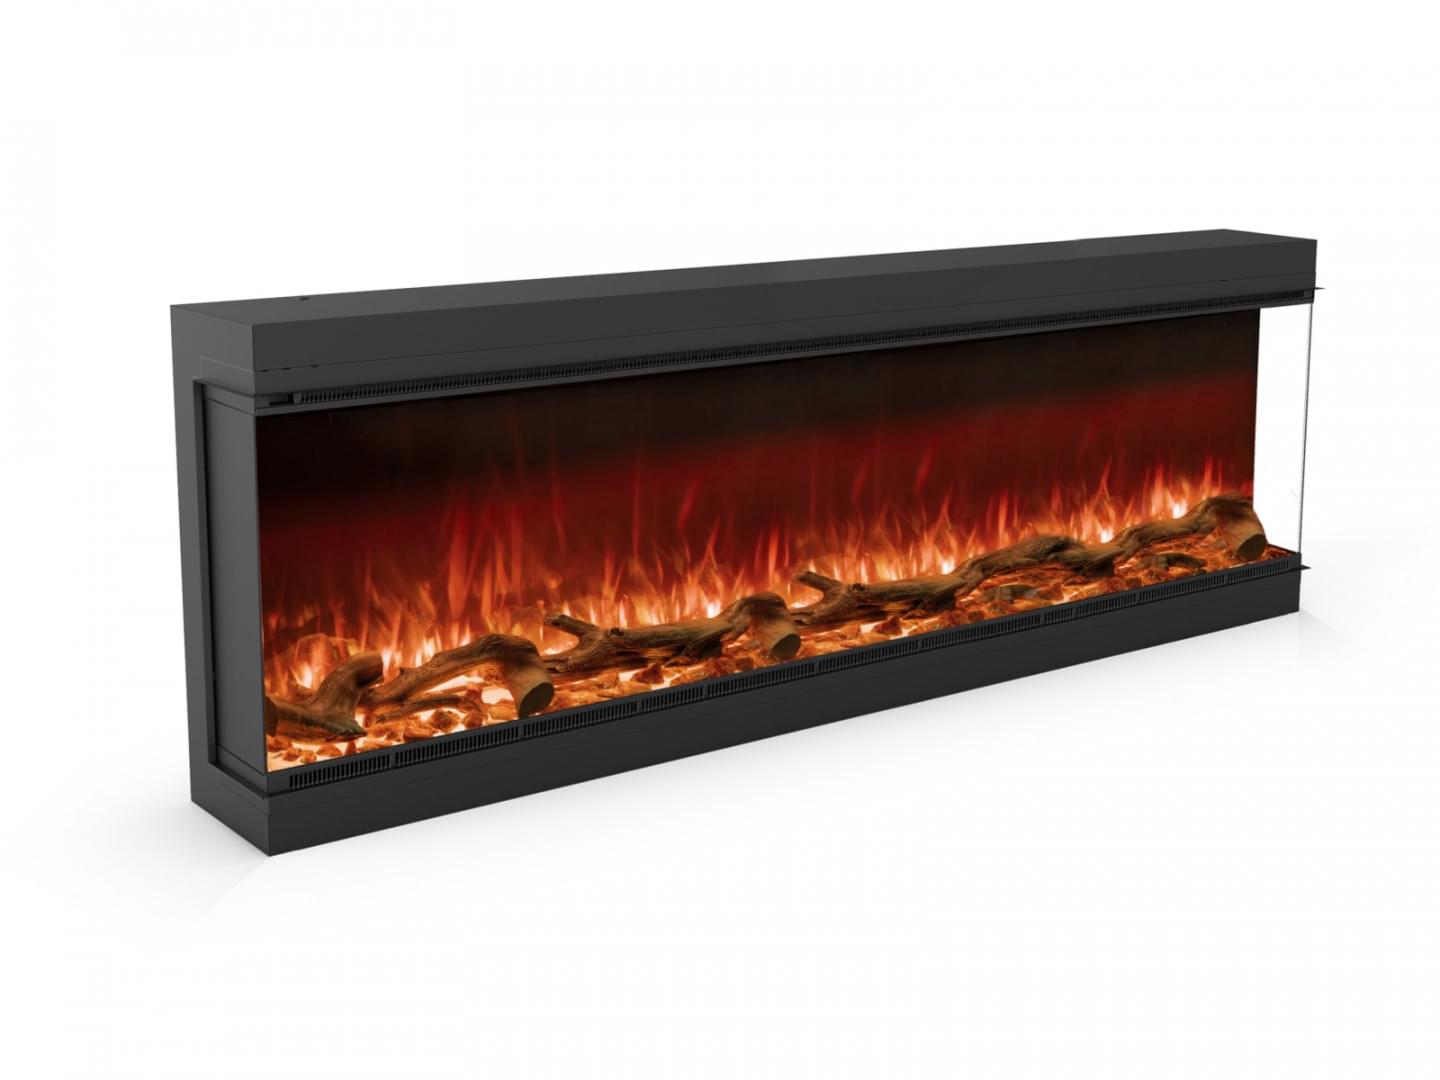 Astro 1800 indoor or outdoor electric fireplace from Planika Net Zero Fireplaces